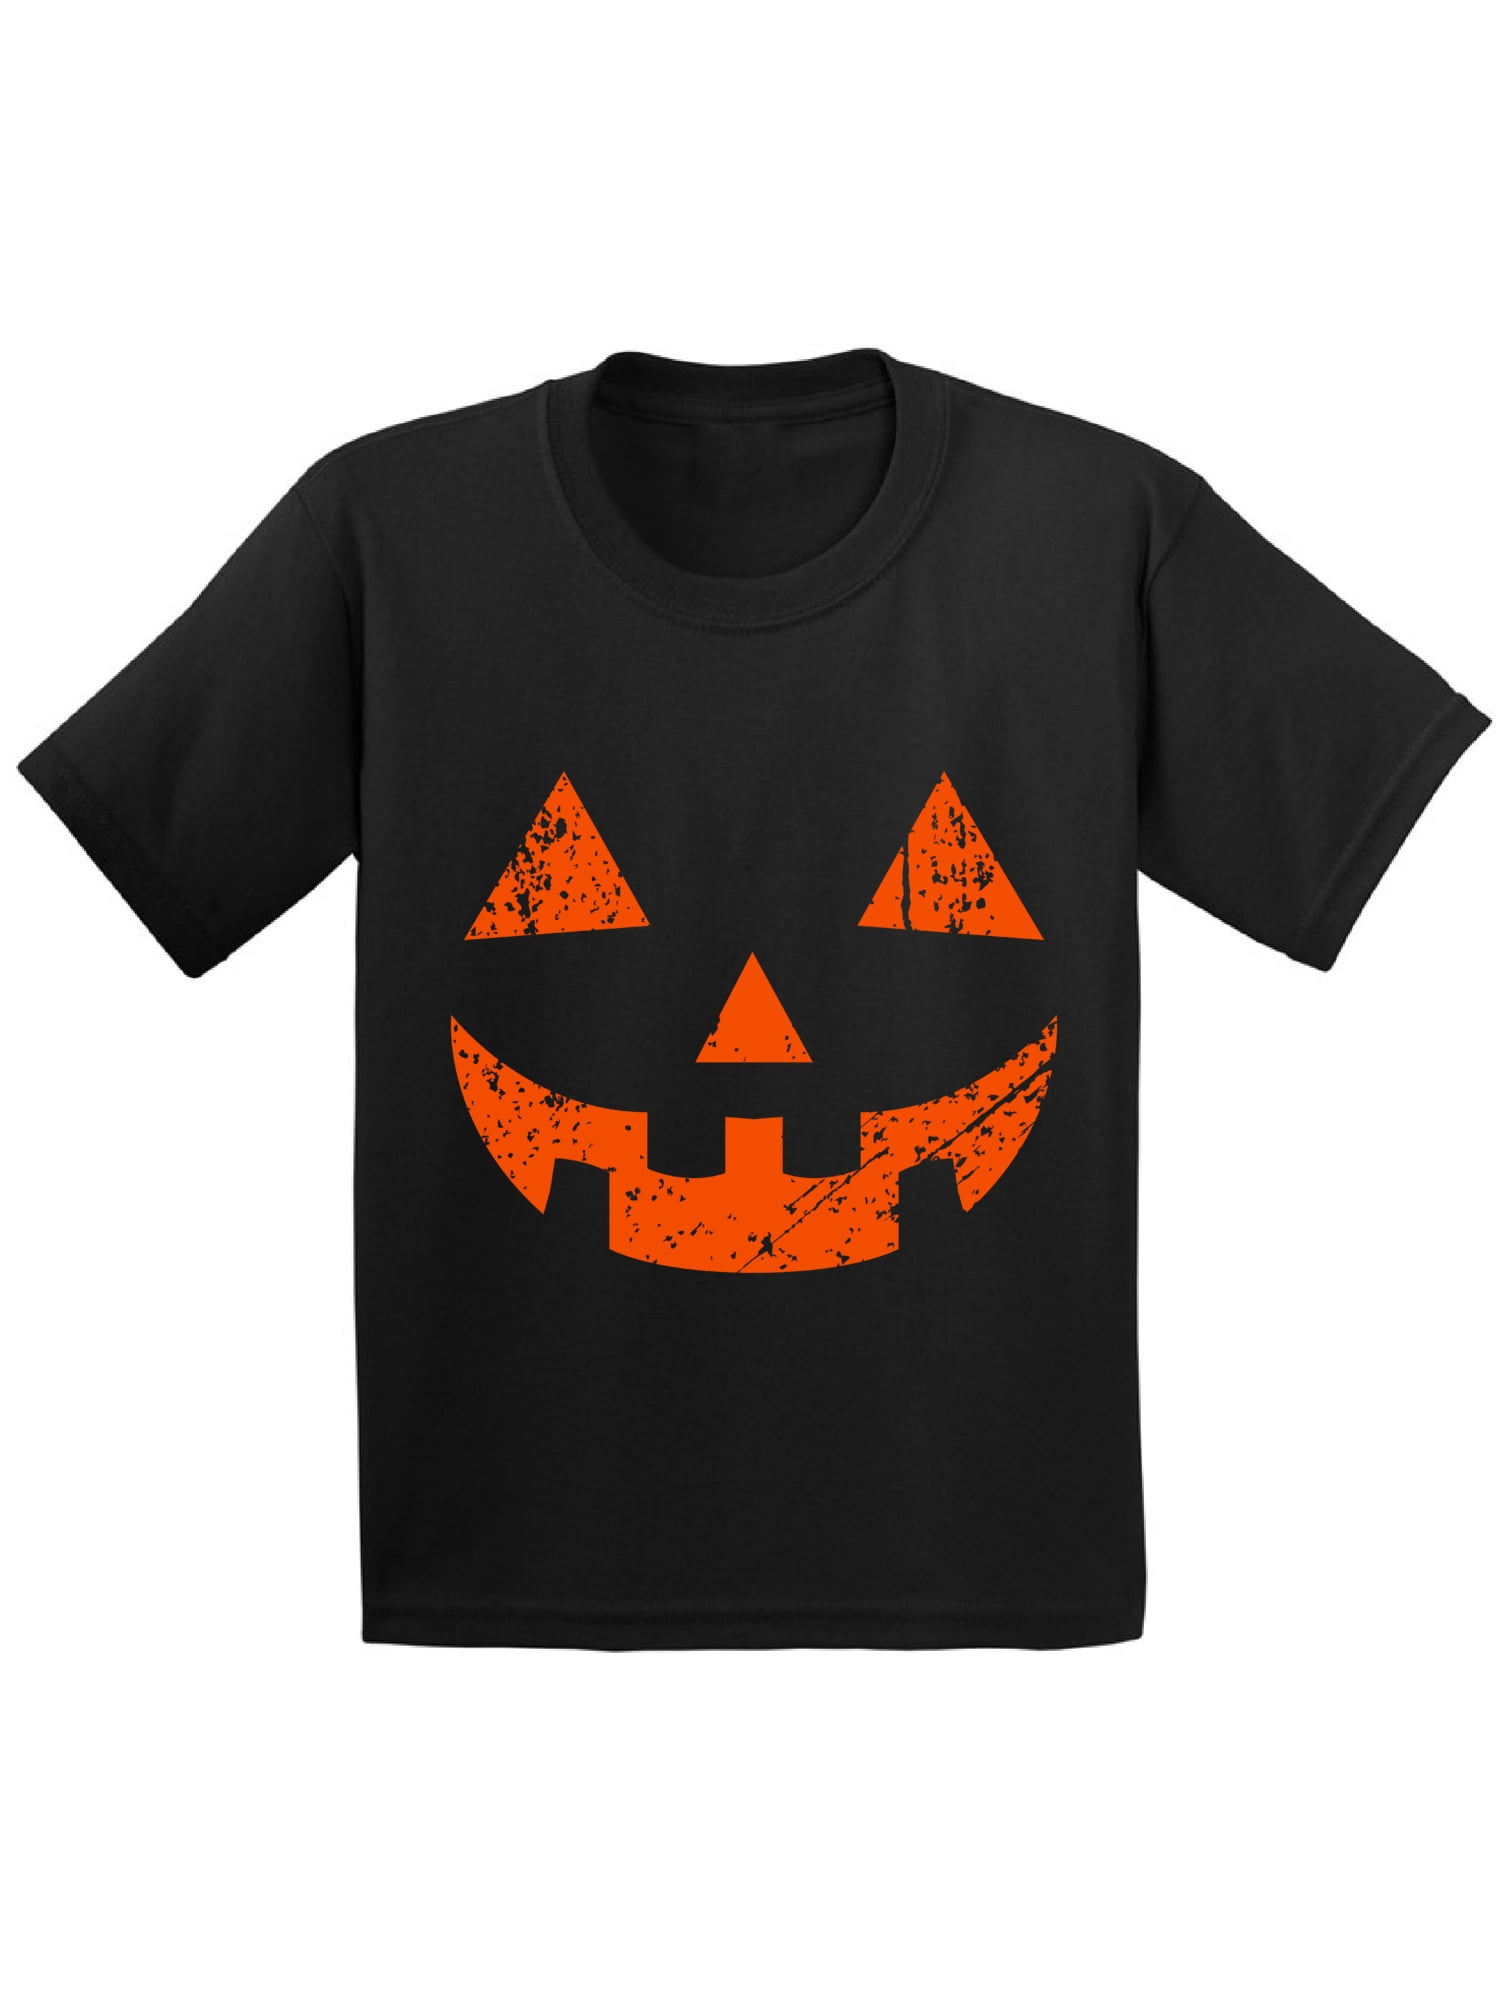 Halloween Shirts HWN Trick Or Treat Shirt Pick of the Patch *UNISEX FIT* Halloween Shirt Funny Halloween Shirt Pumpkin Shirt